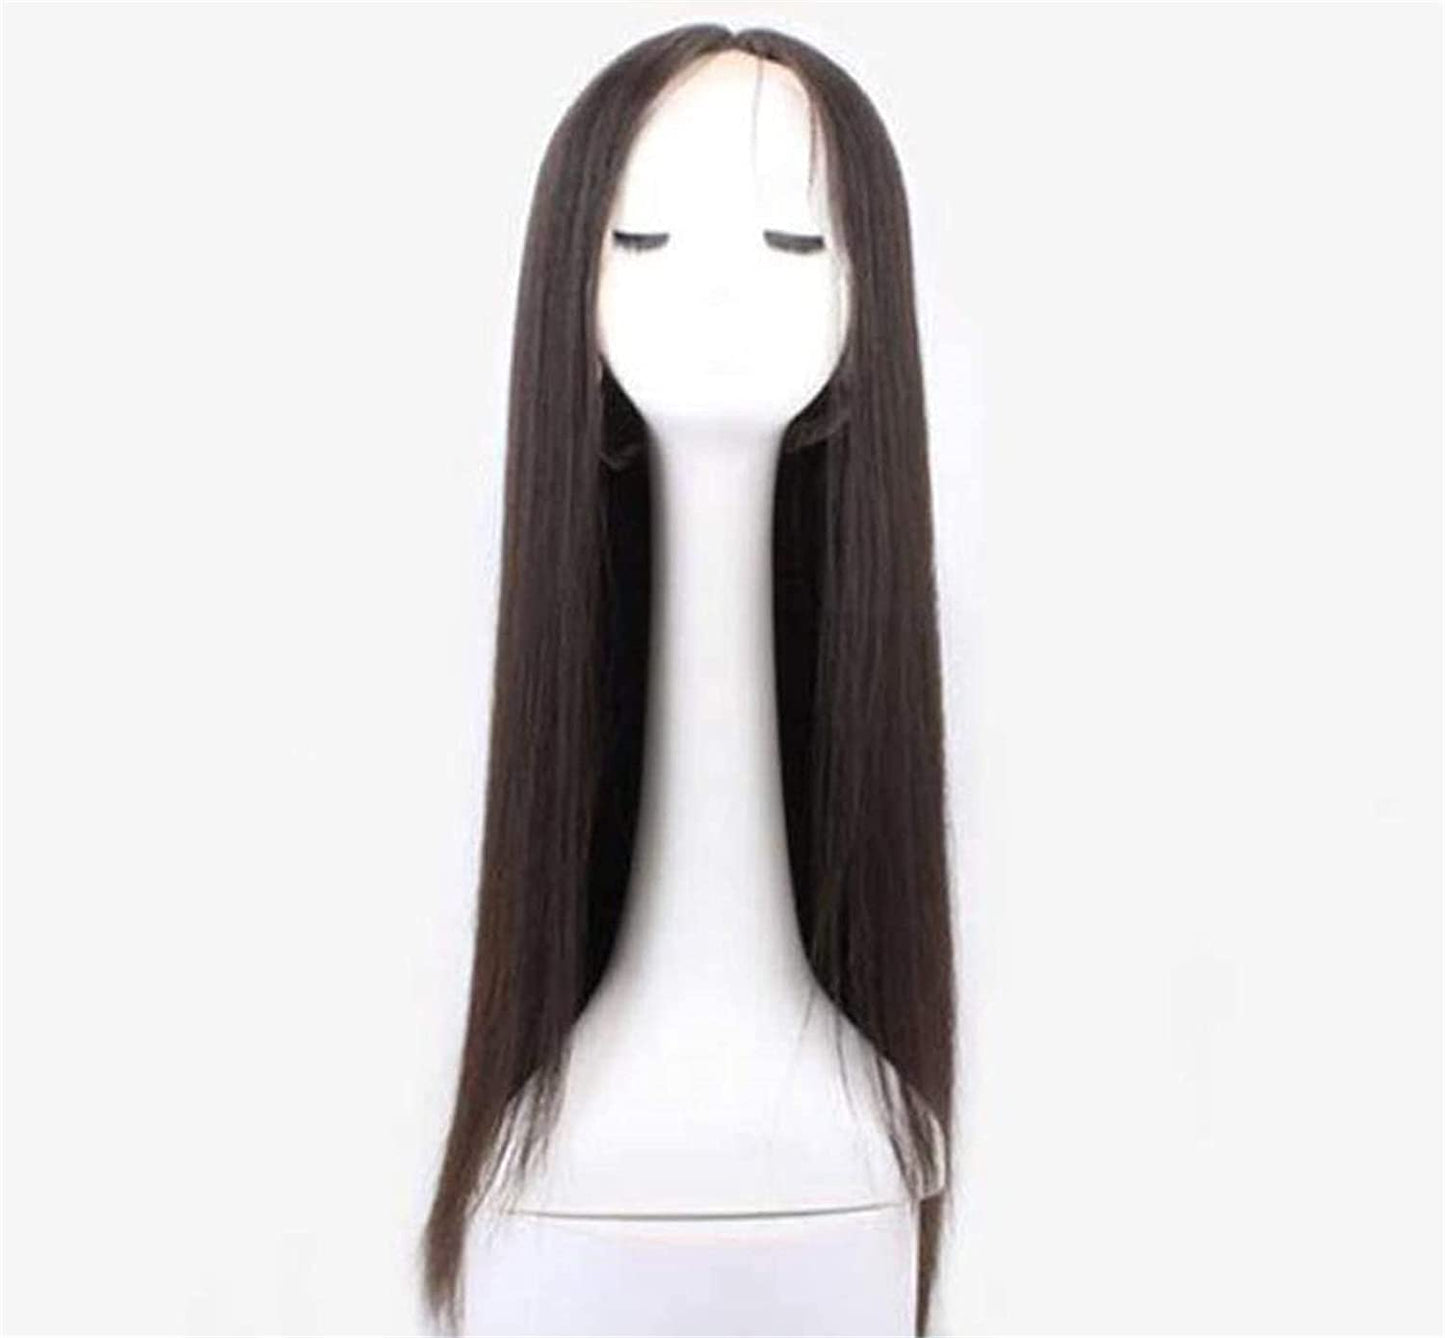 Lush Locks Hair Replacement, French Lace Human Hair wig for Women.